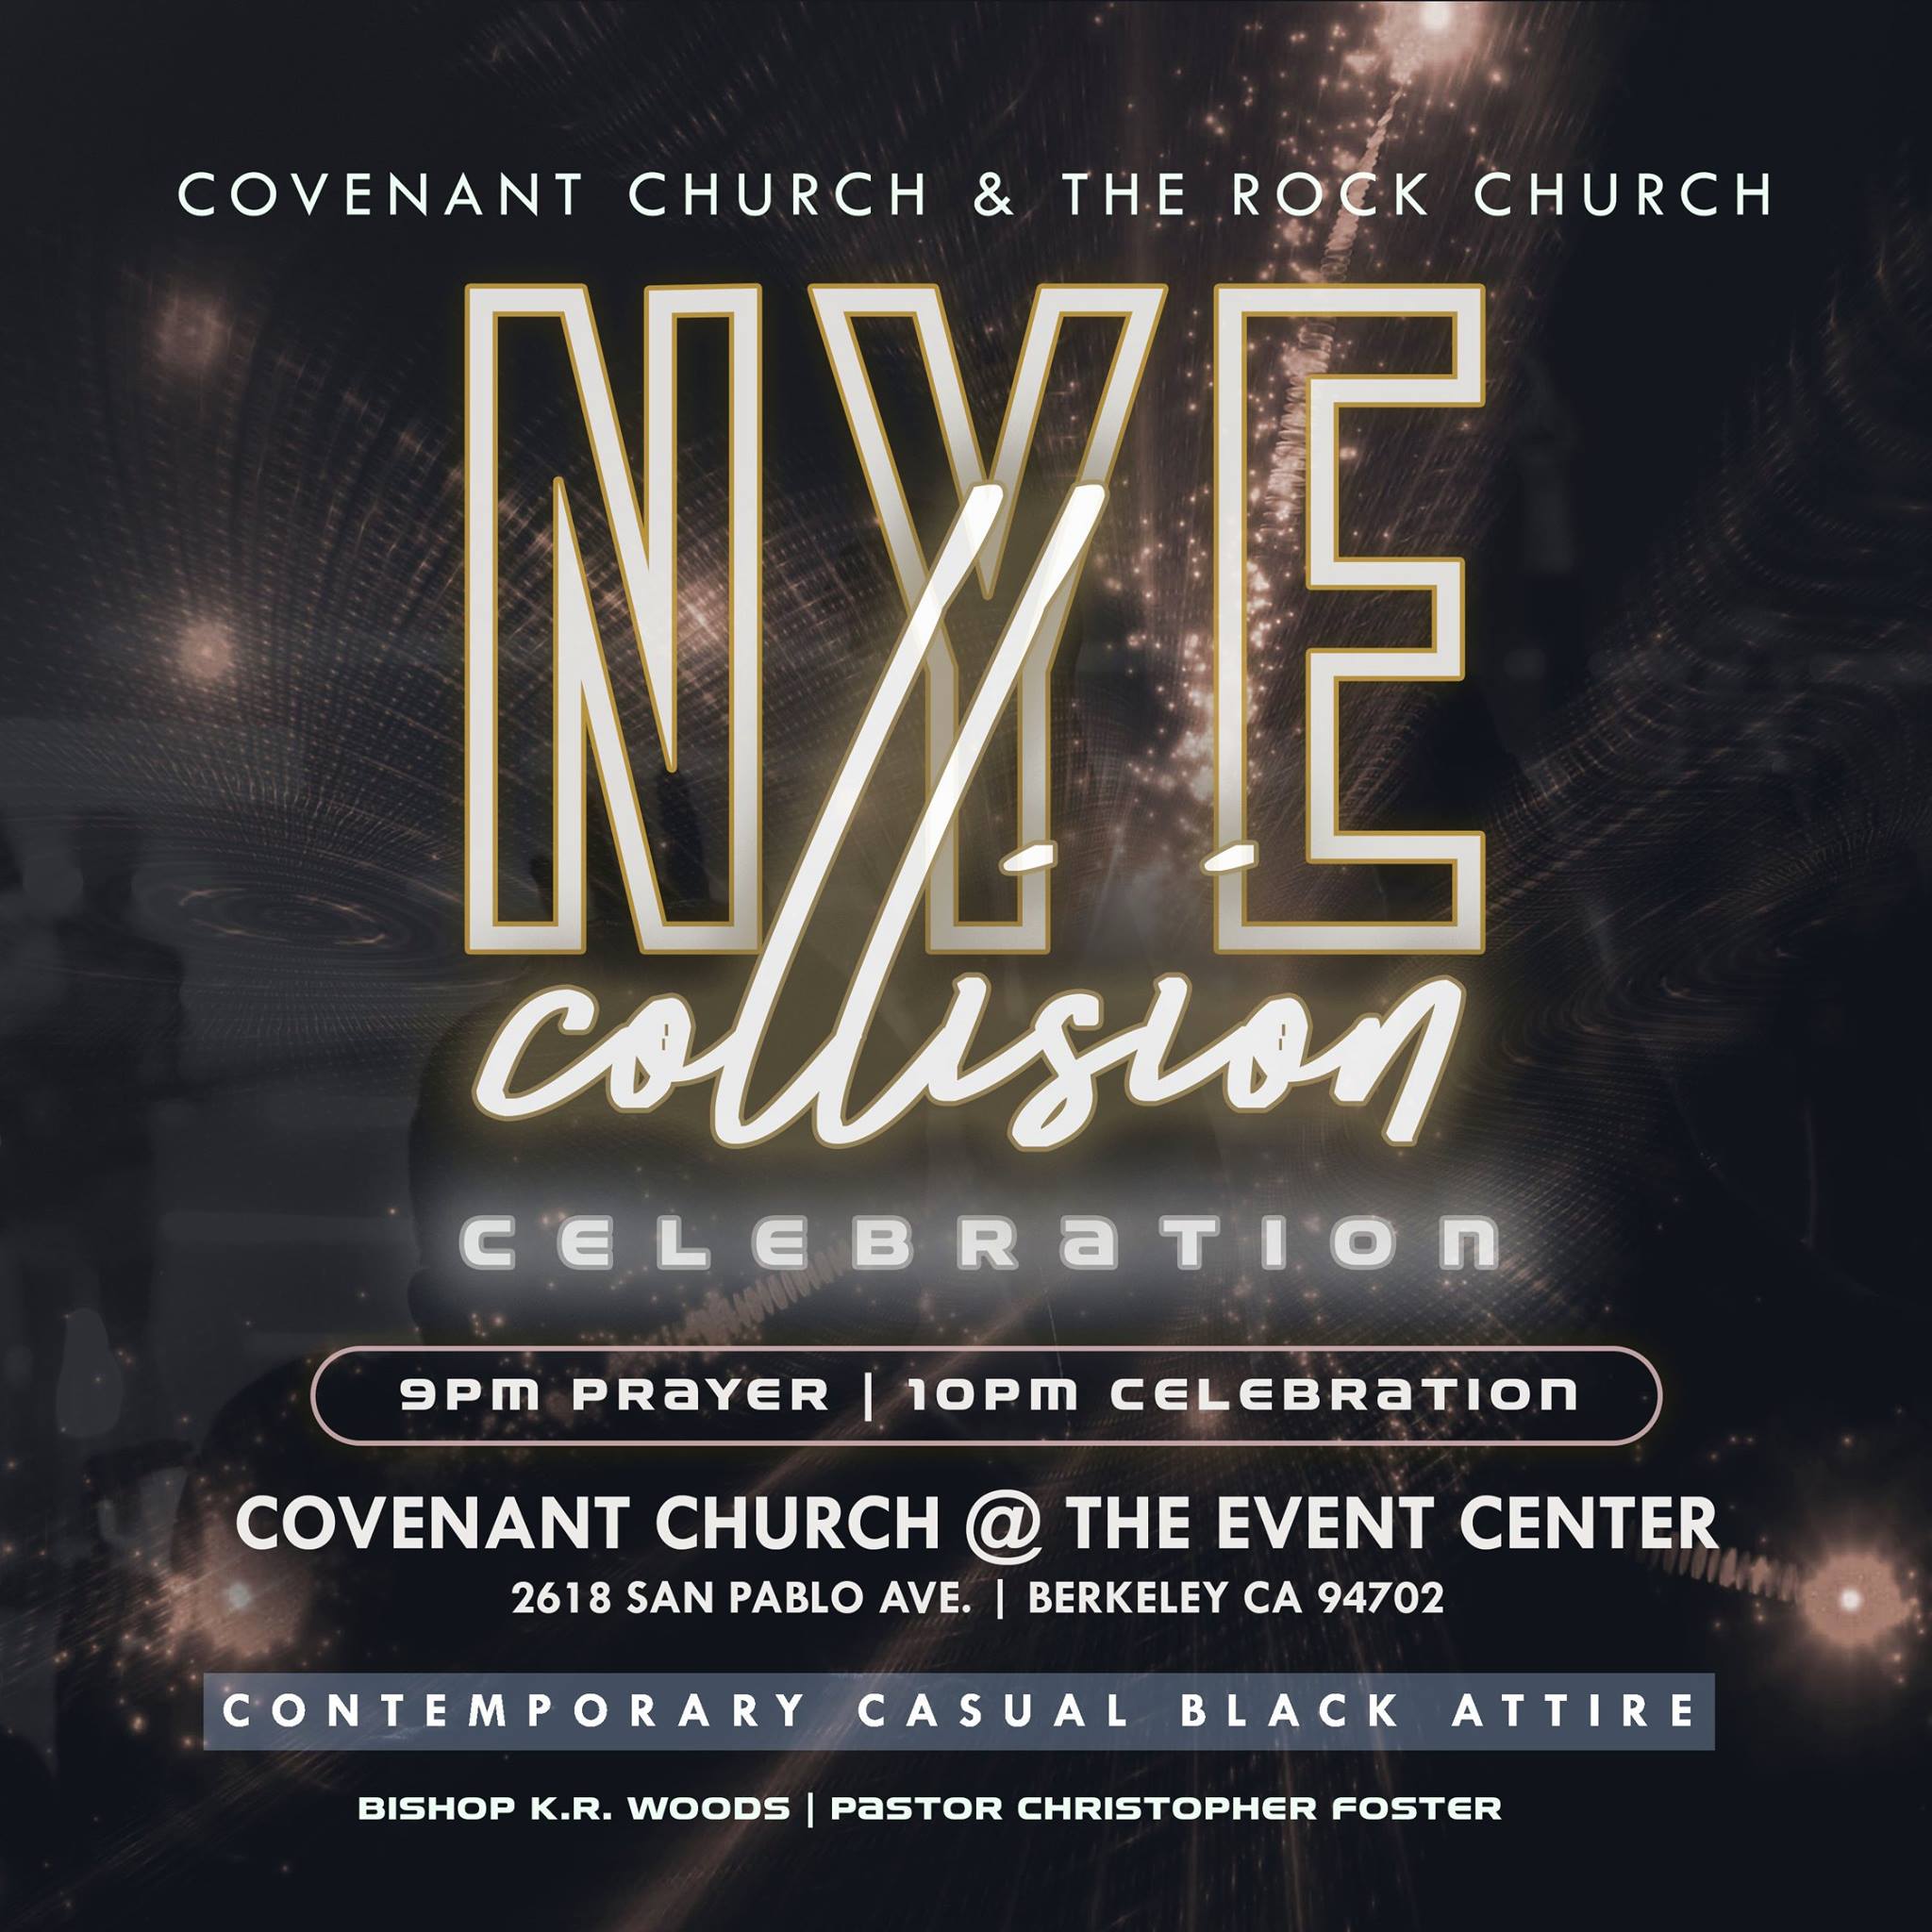 New Year's Eve Collision Celebration